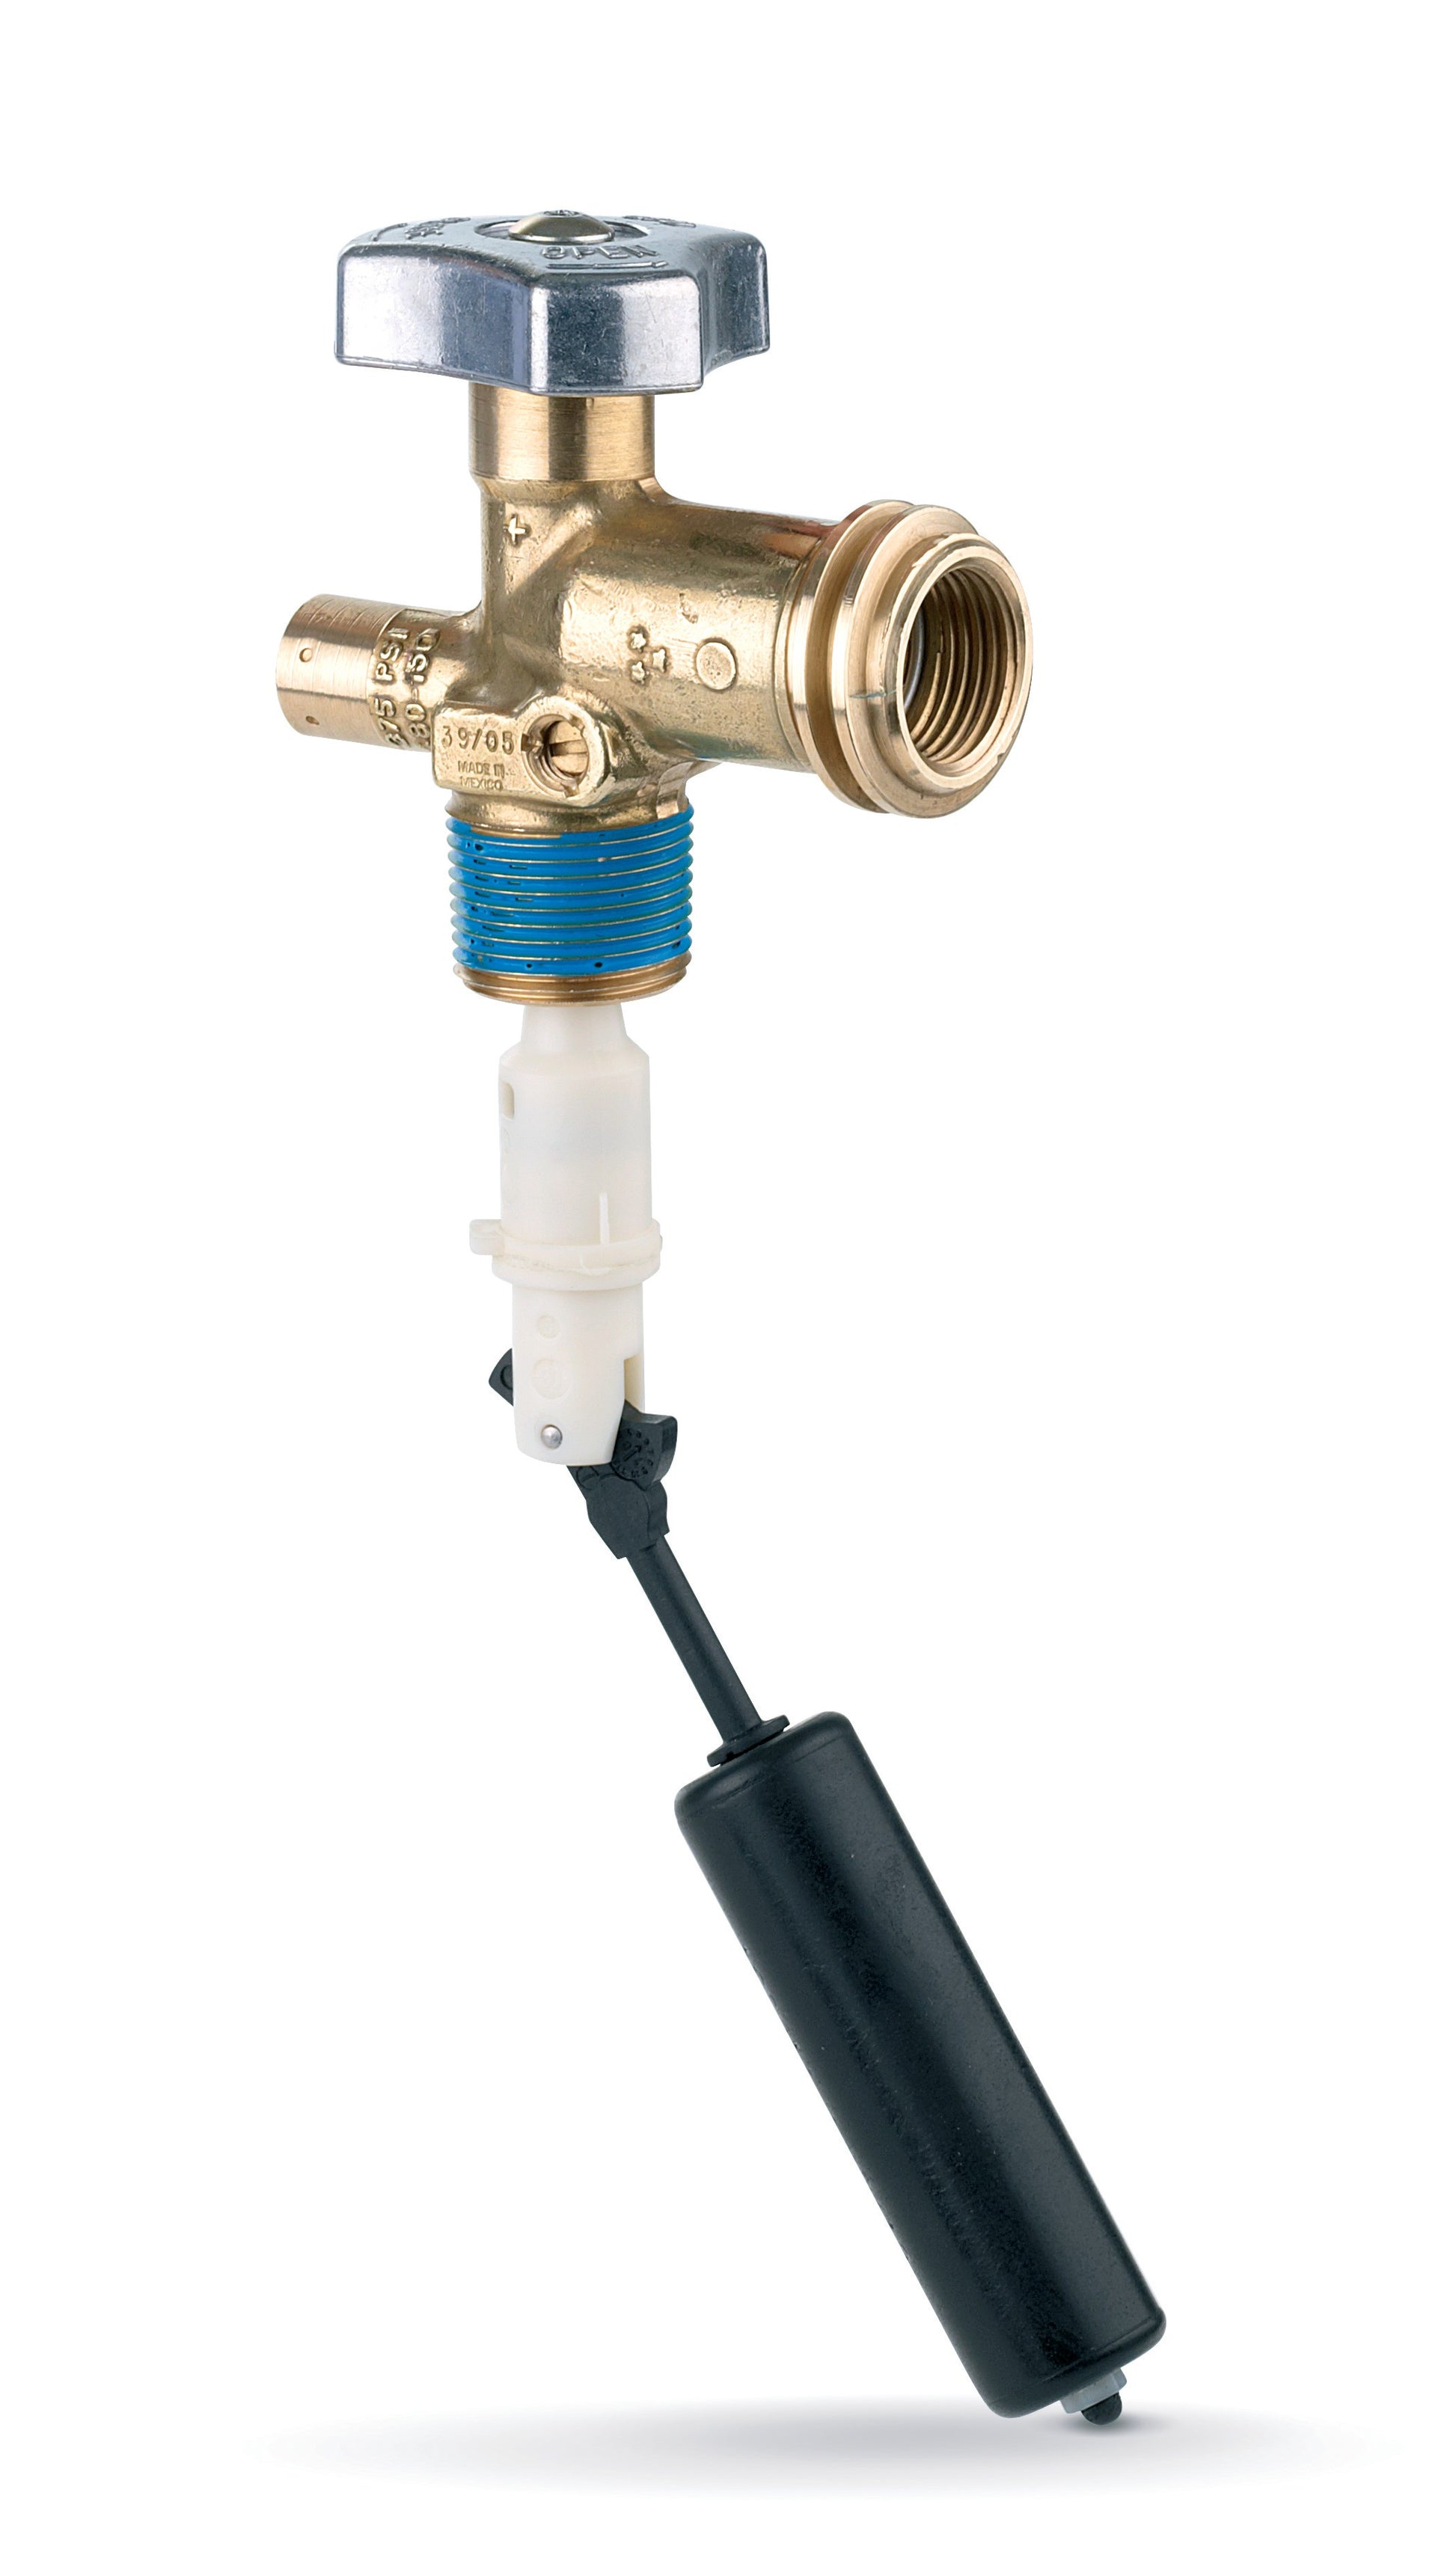 OPD Valve - DT 6.5 NO LONGER AVAILABLE